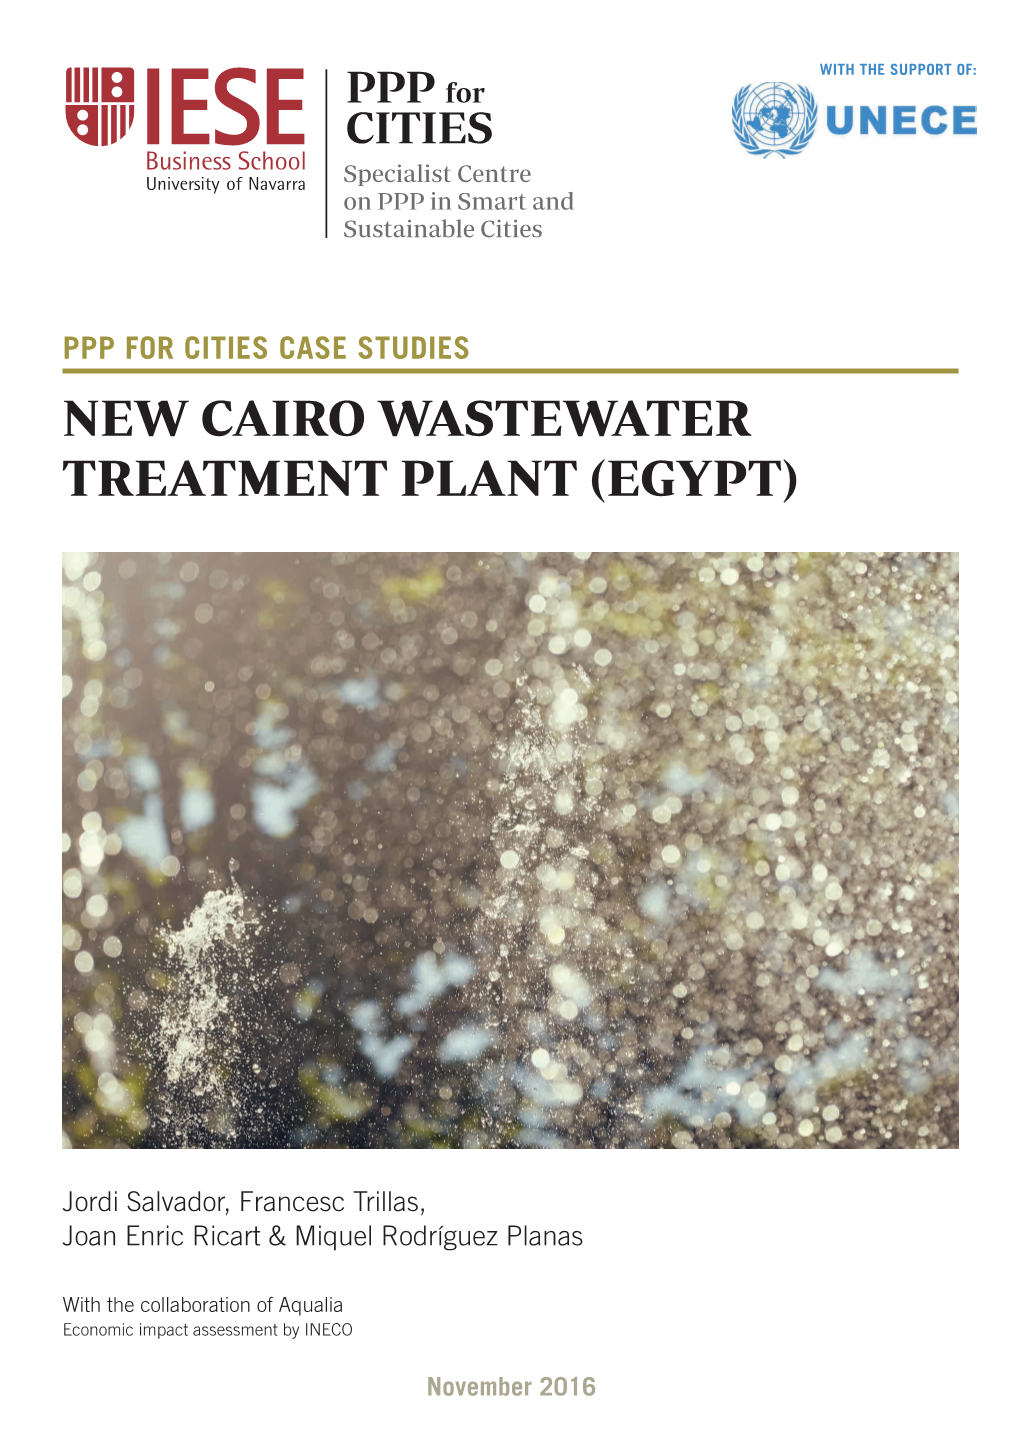 New Cairo Wastewater Treatment Plant (Egypt)